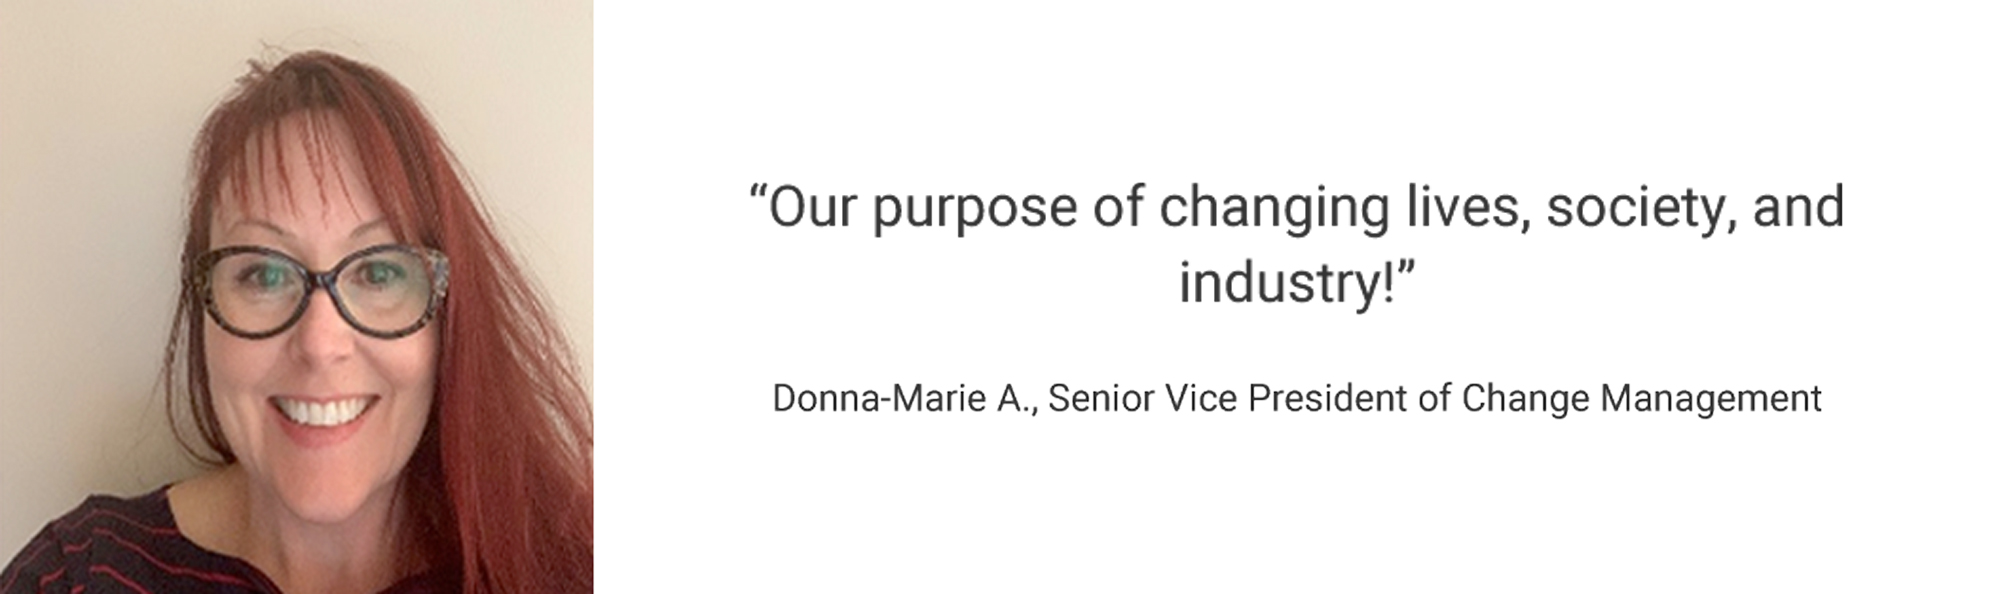 Employee Testimonial, "Our purpose of changing lives, society, and industry!" Donna-Marrie A.,Senior Vice President of Change Management